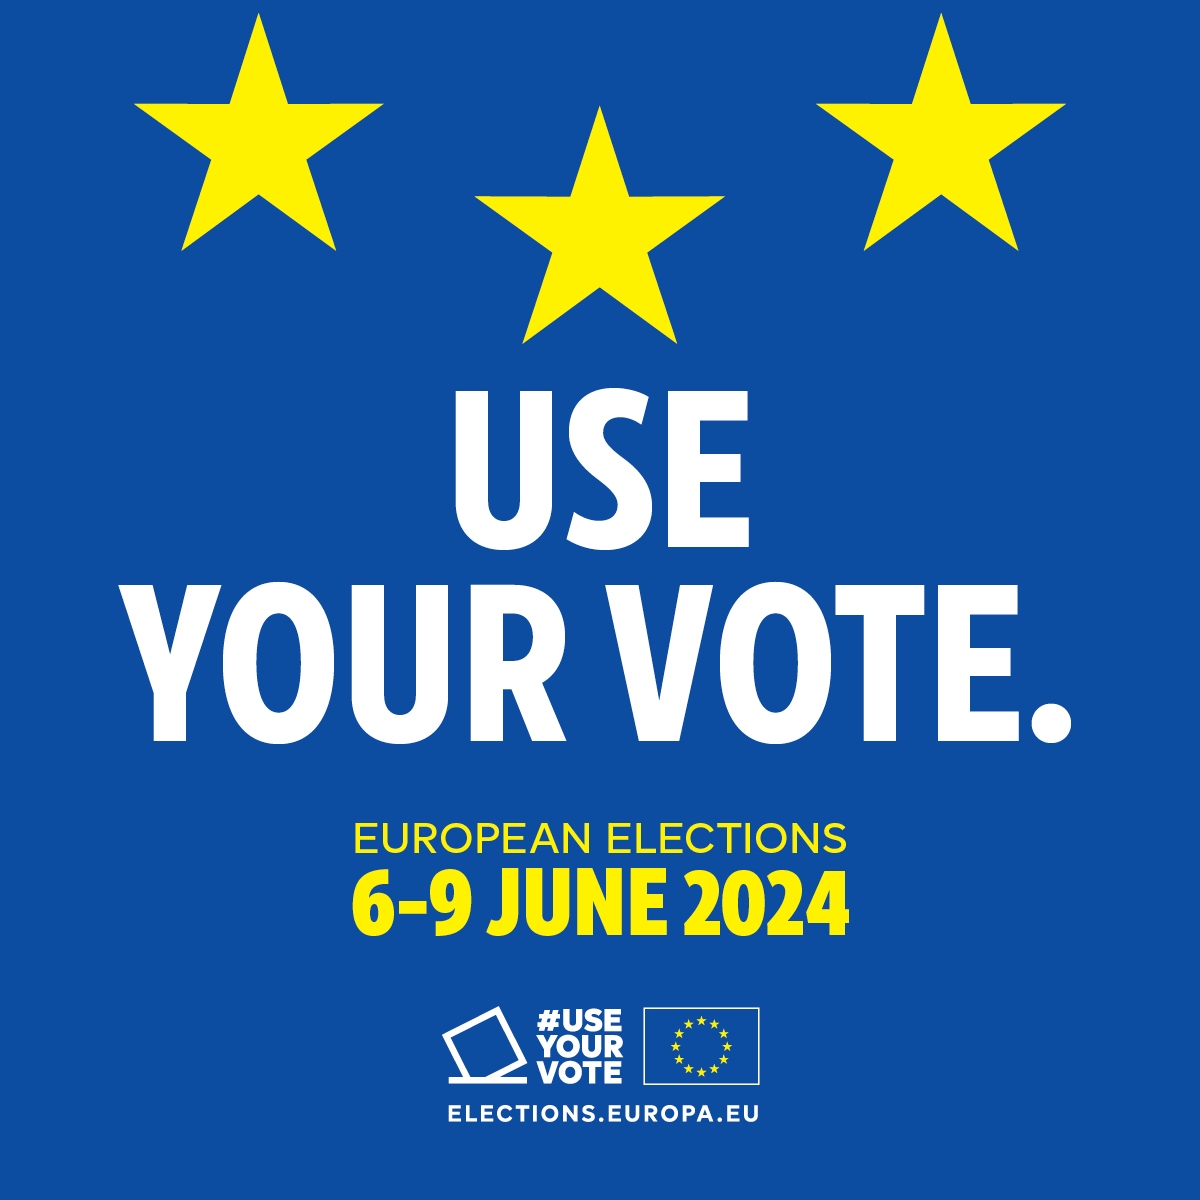 #UseYourVote to make a difference in the EU. Register for EU elections and help shape the world you live in.